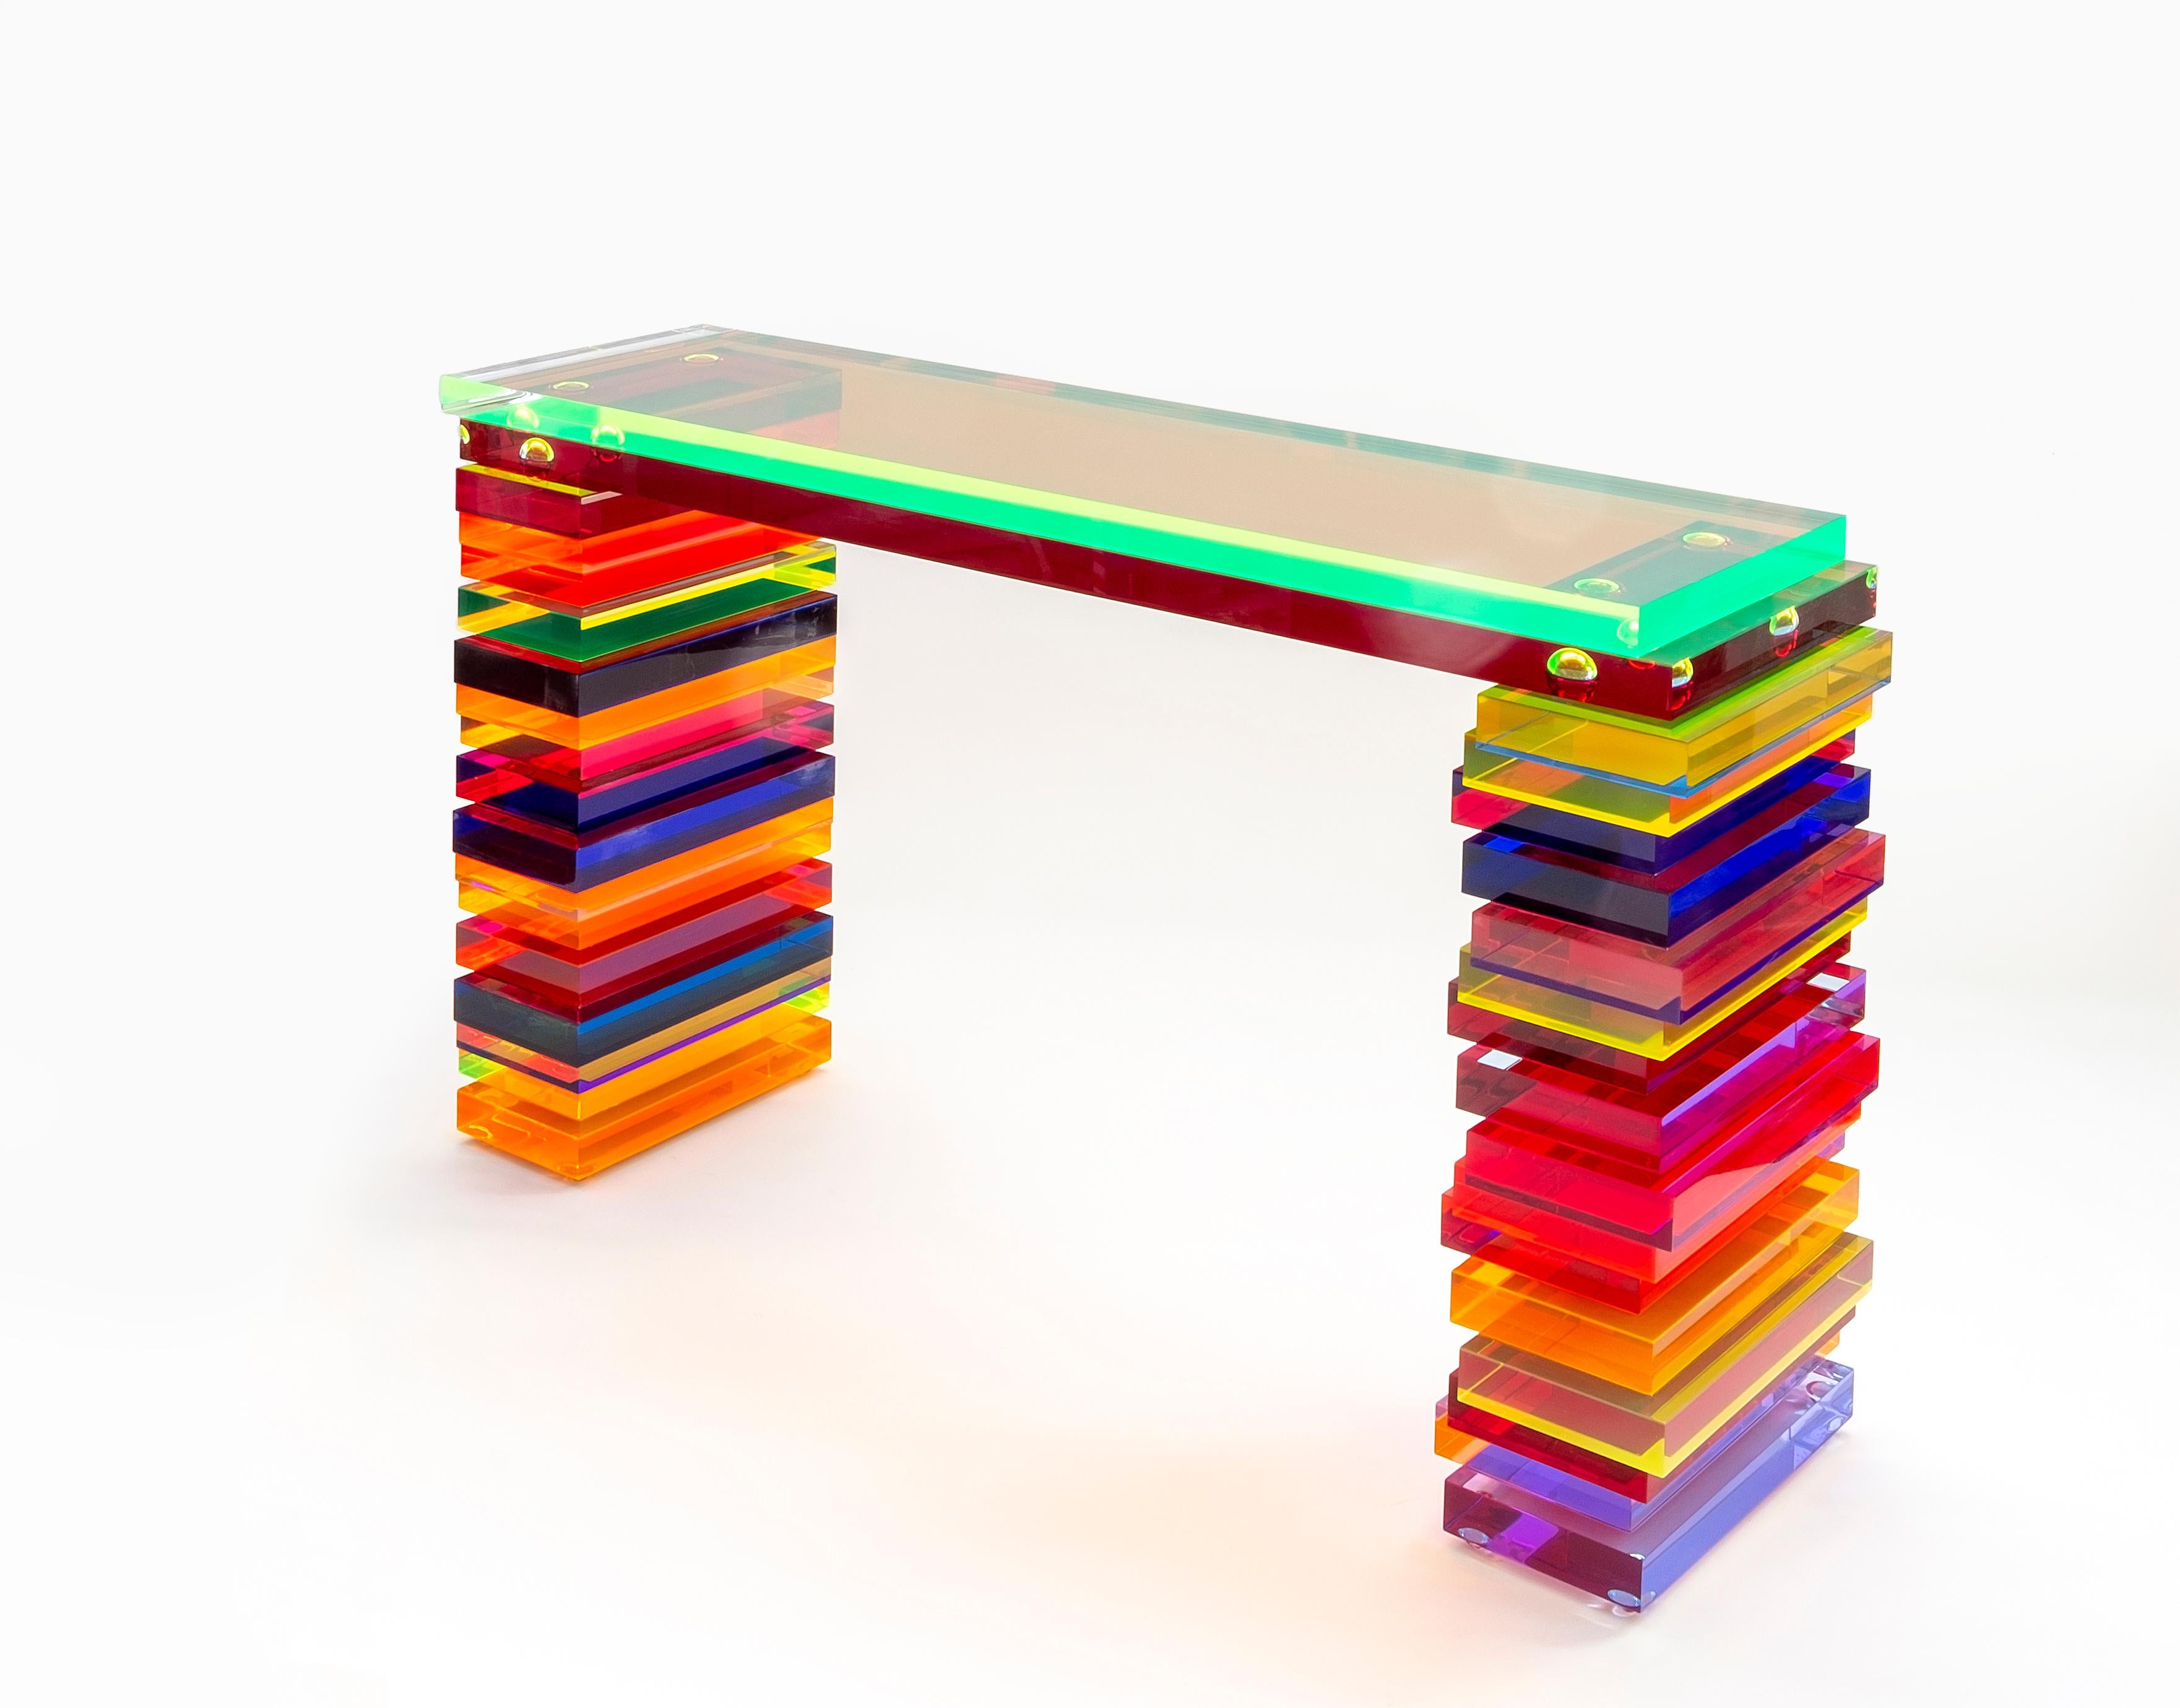 Console Model Disallineata in multi-color plexiglass with an overlap of misaligned rectangular elements
A series of unique pieces designed by Studio Superego for Superego Editions.

Biography
Superego editions was born in 2006, performing a constant